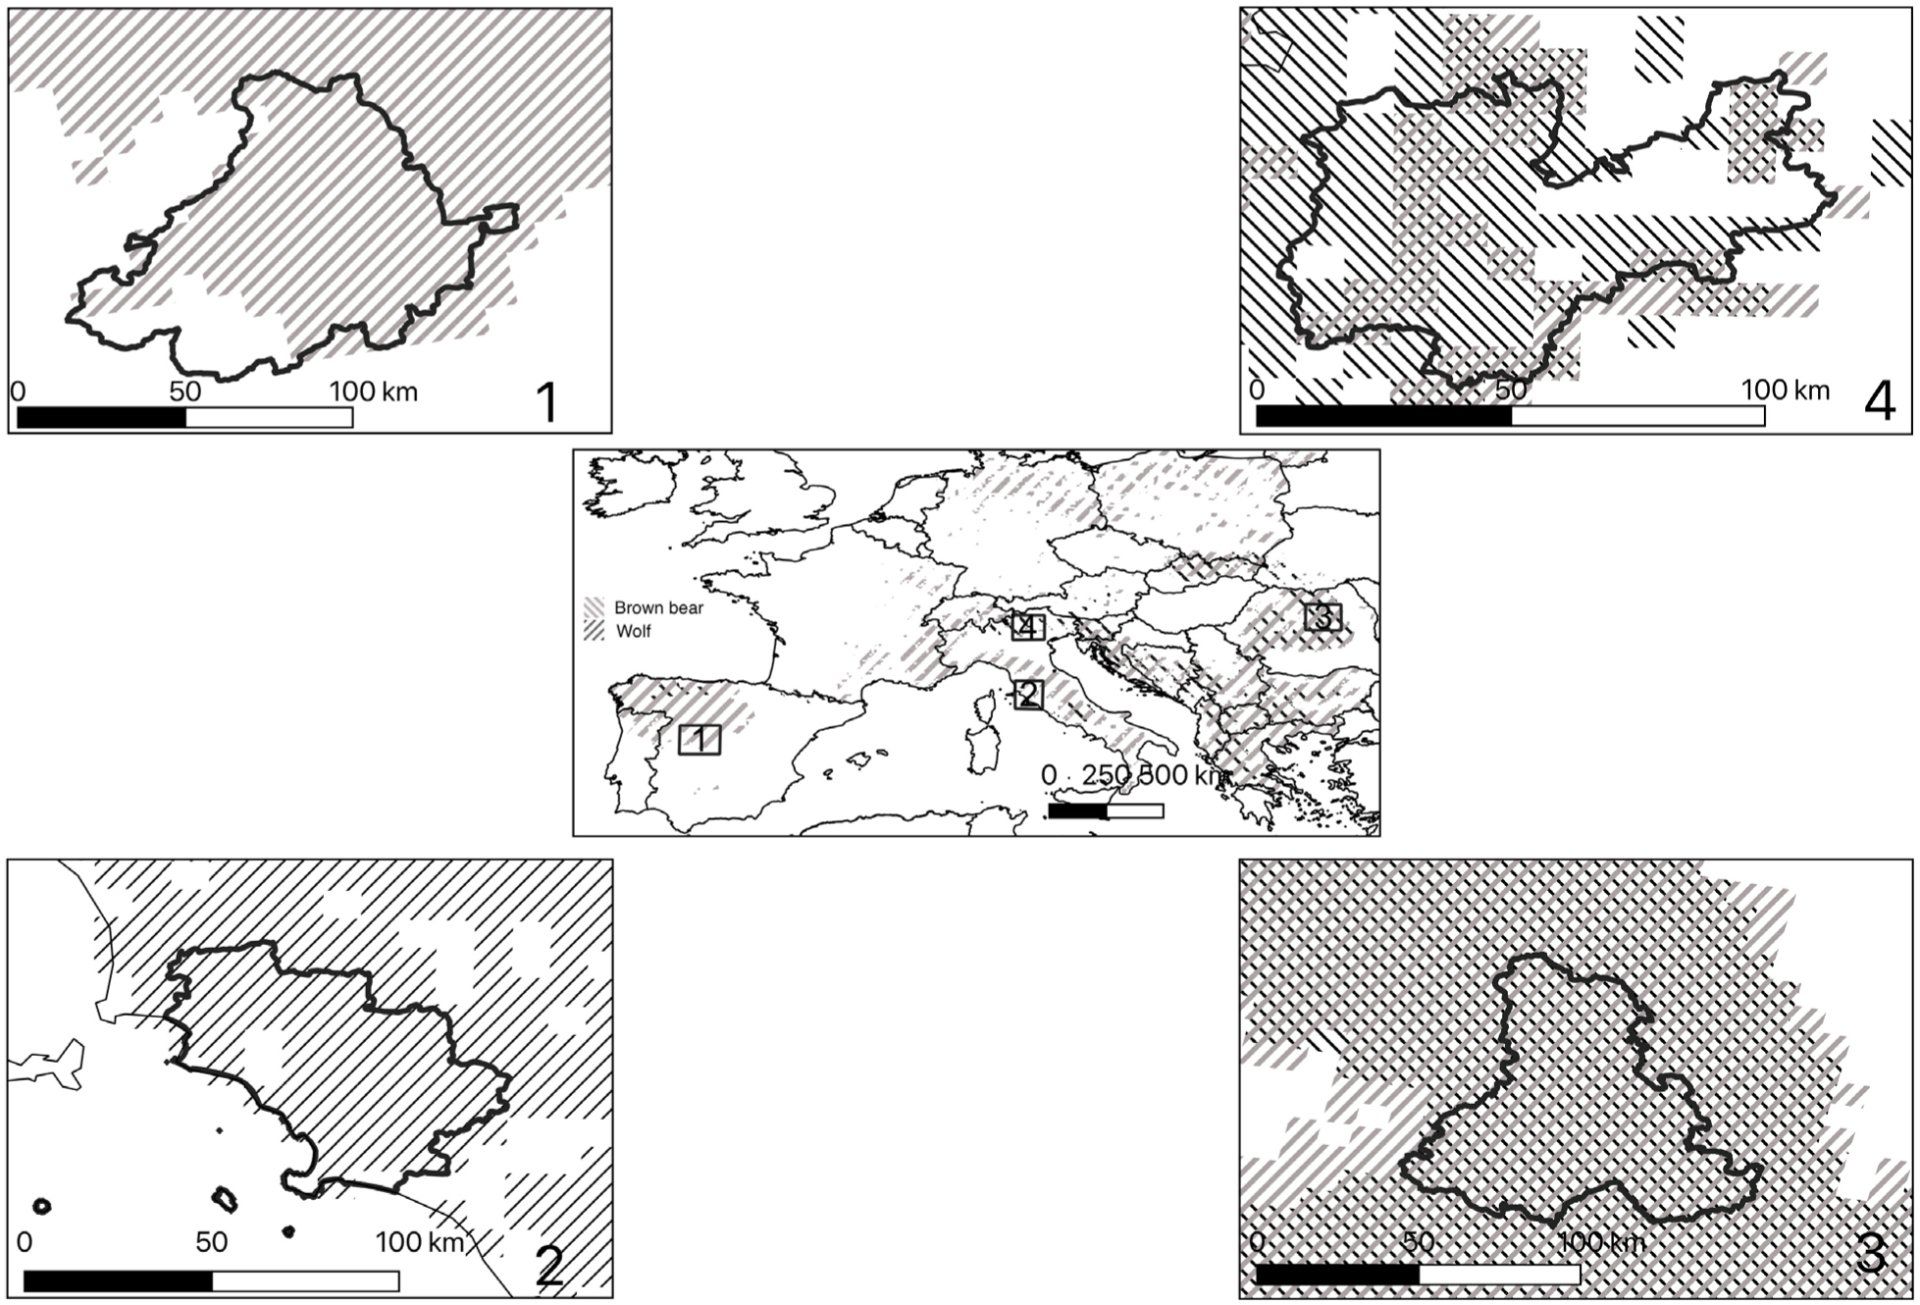 Location of the study sites with respect to the distribution of the large carnivores involved in the study: brown bear (Ursus arctos) and wolf (Canis lupus).